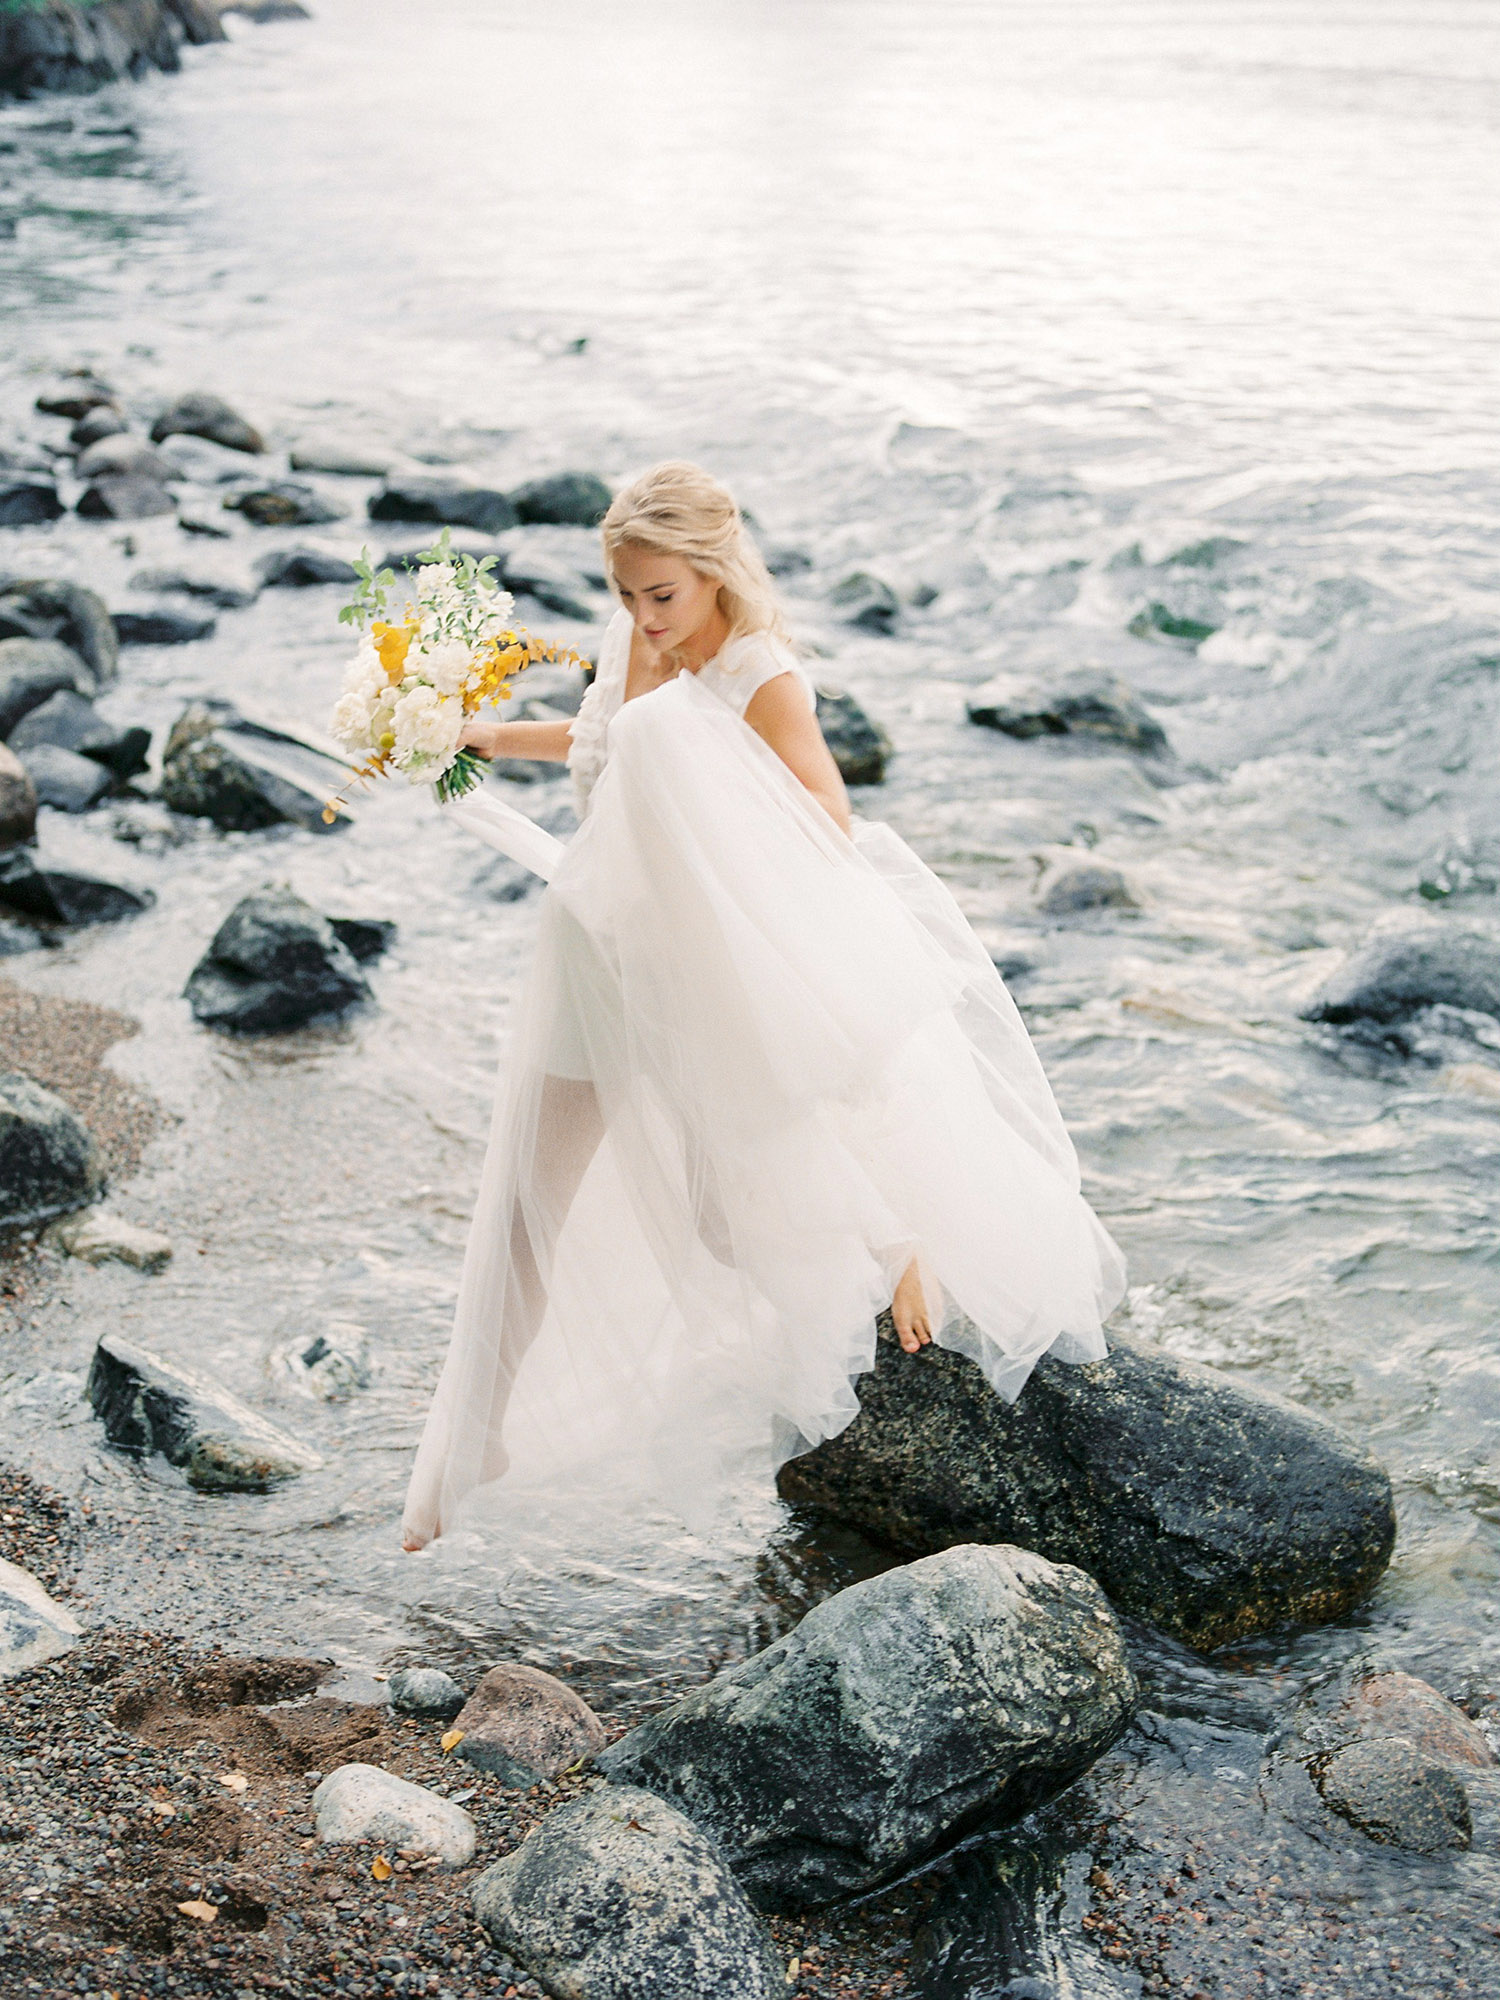 14 Tips that Every Bride Should Know Before Her Wedding